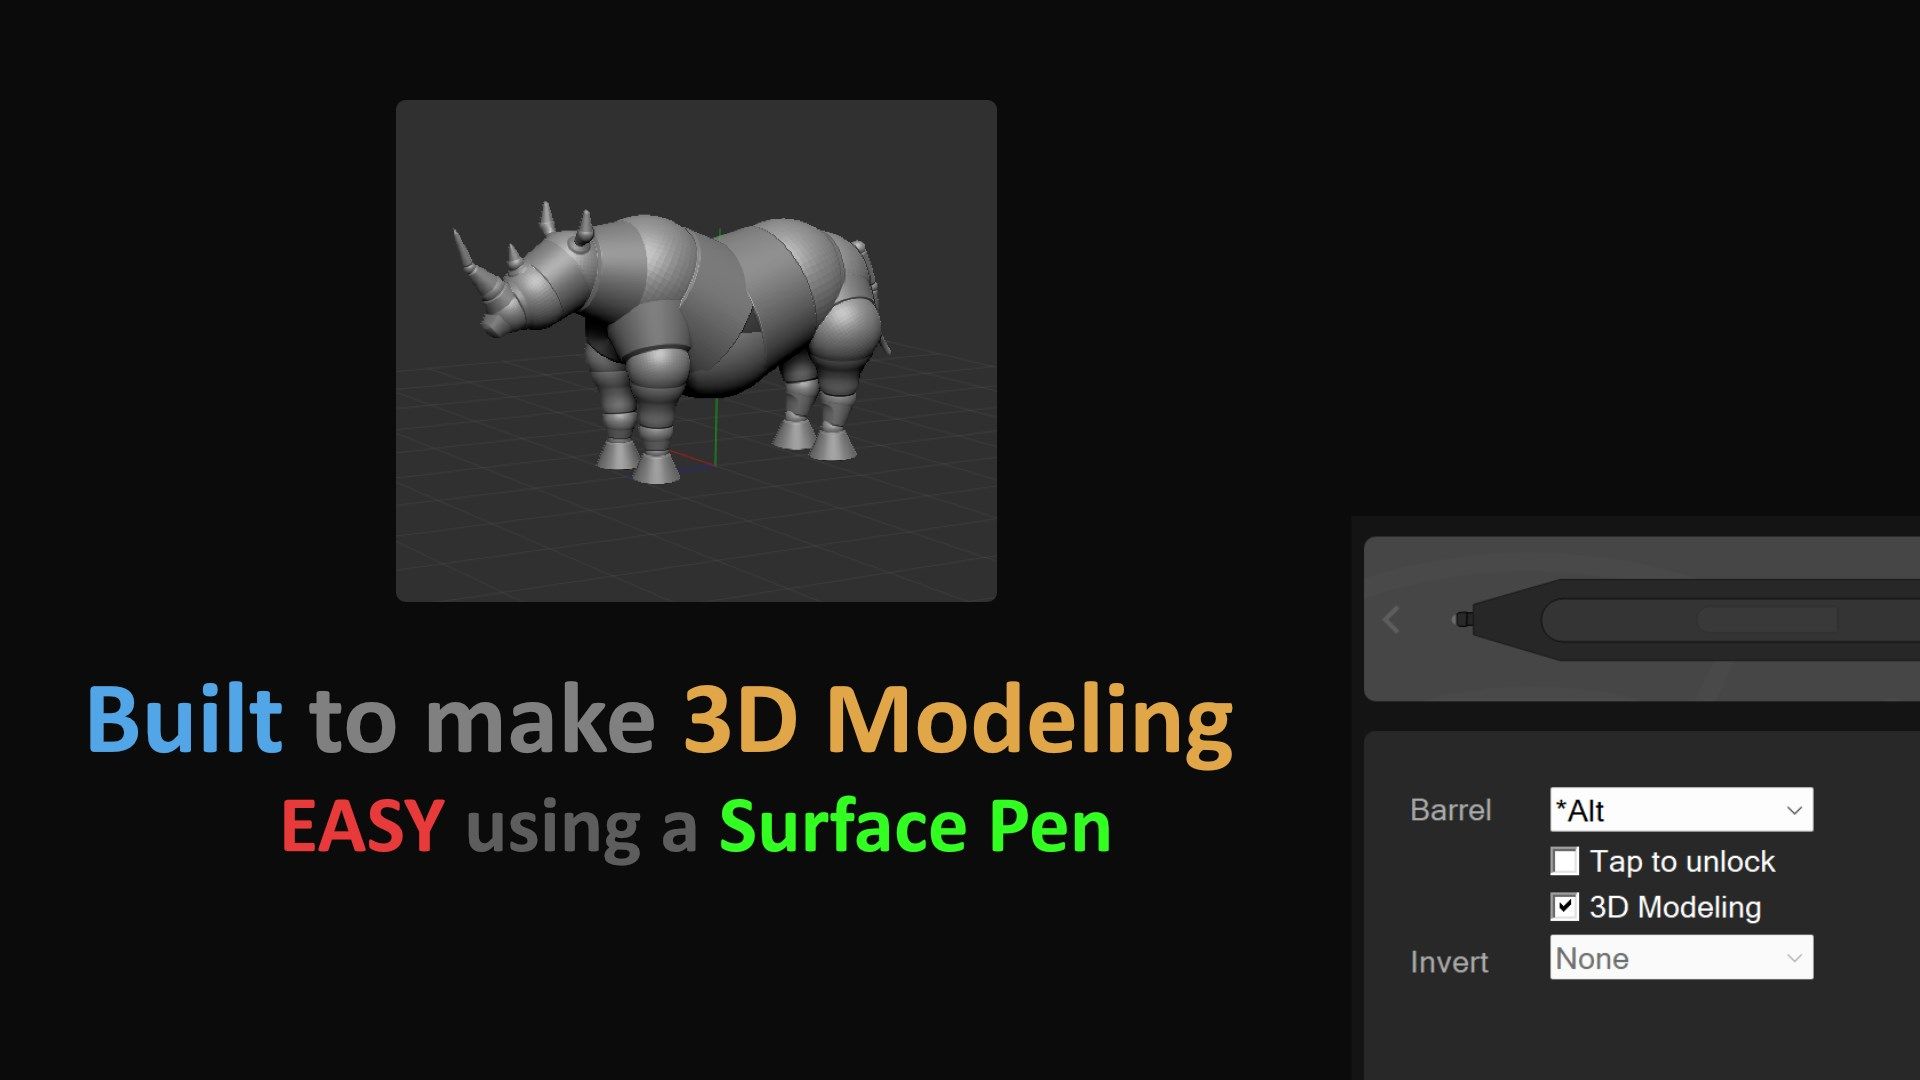 Modifiers MADE to work with your stylus AND 3D modeling programs like Zbrush, Maya, Blender and more